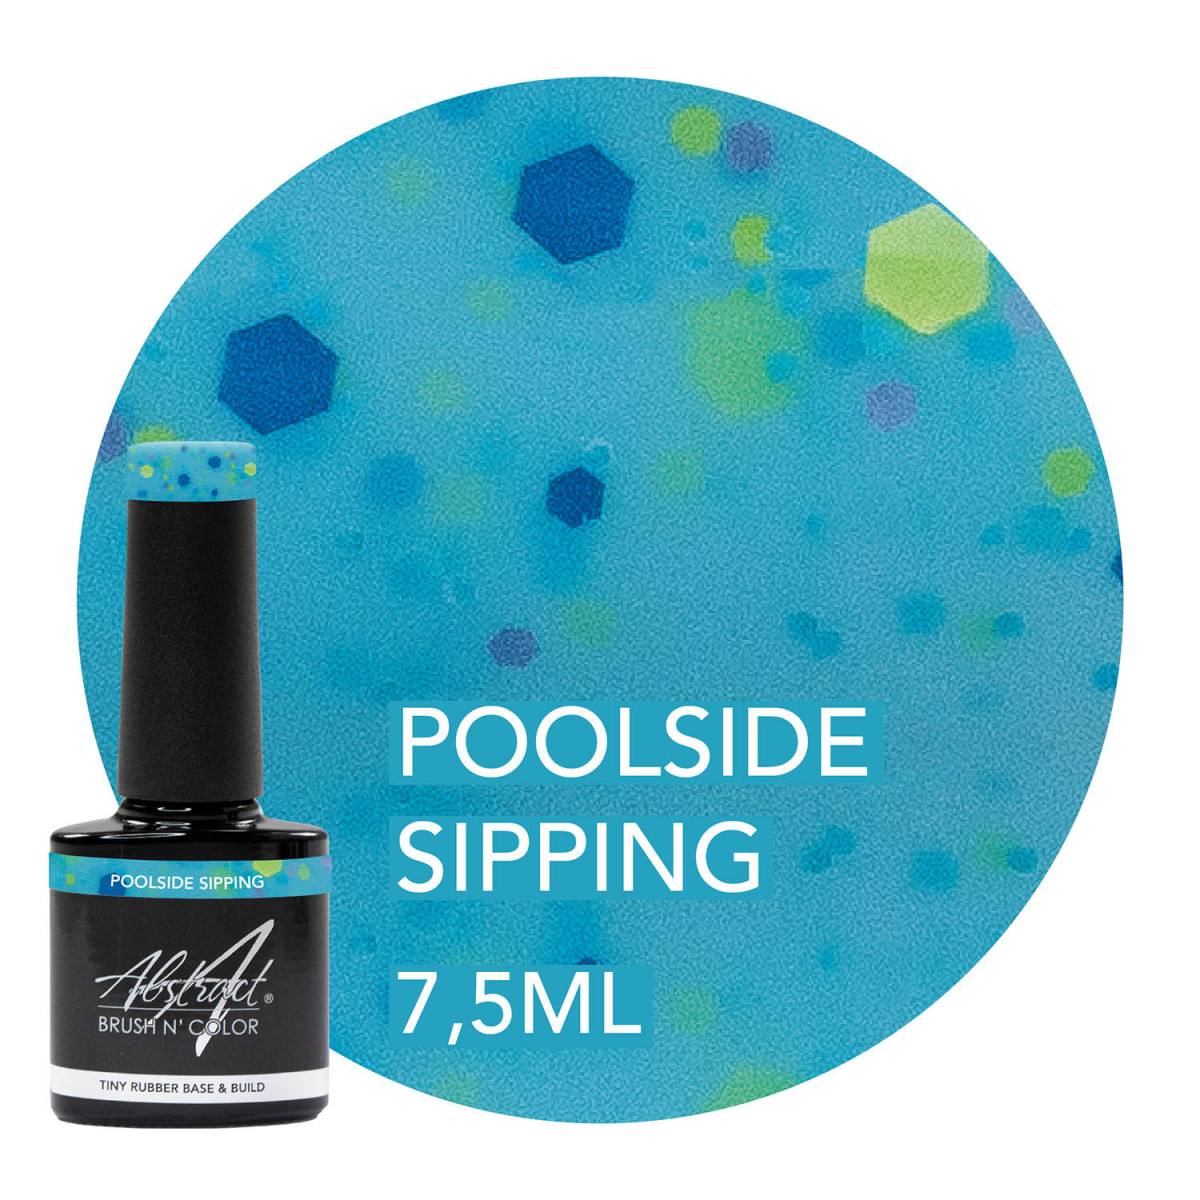 PRE-COMMANDE Poolside Glimming - TINY Rubber Base & Build Gel Abstract